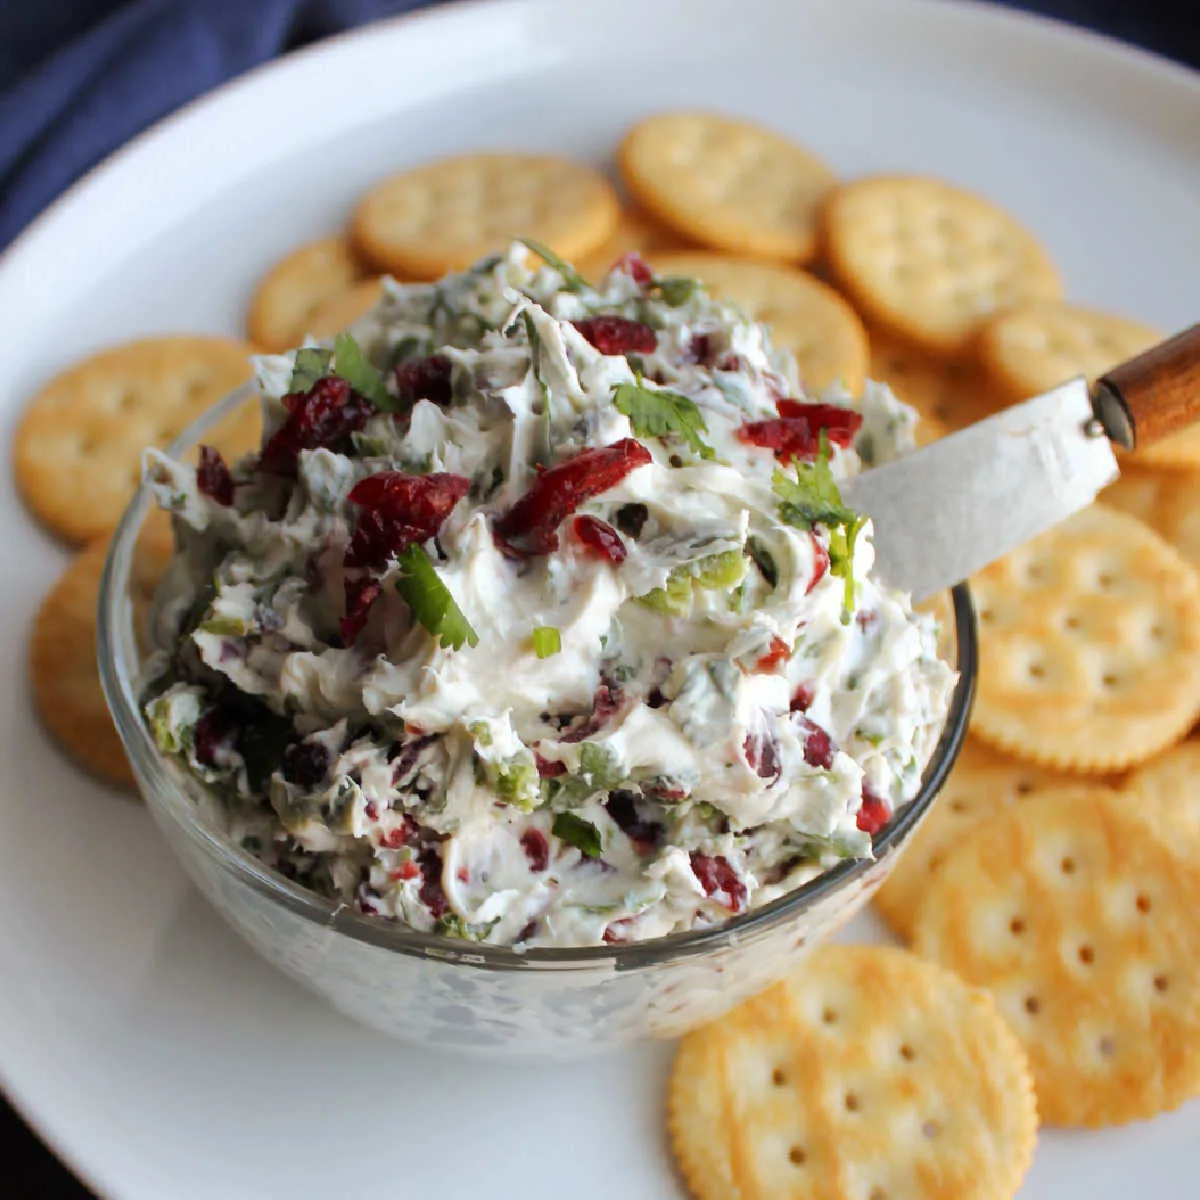 small bowl of cranberry jalapeno cream cheese spread on plate with crackers, ready to eat.